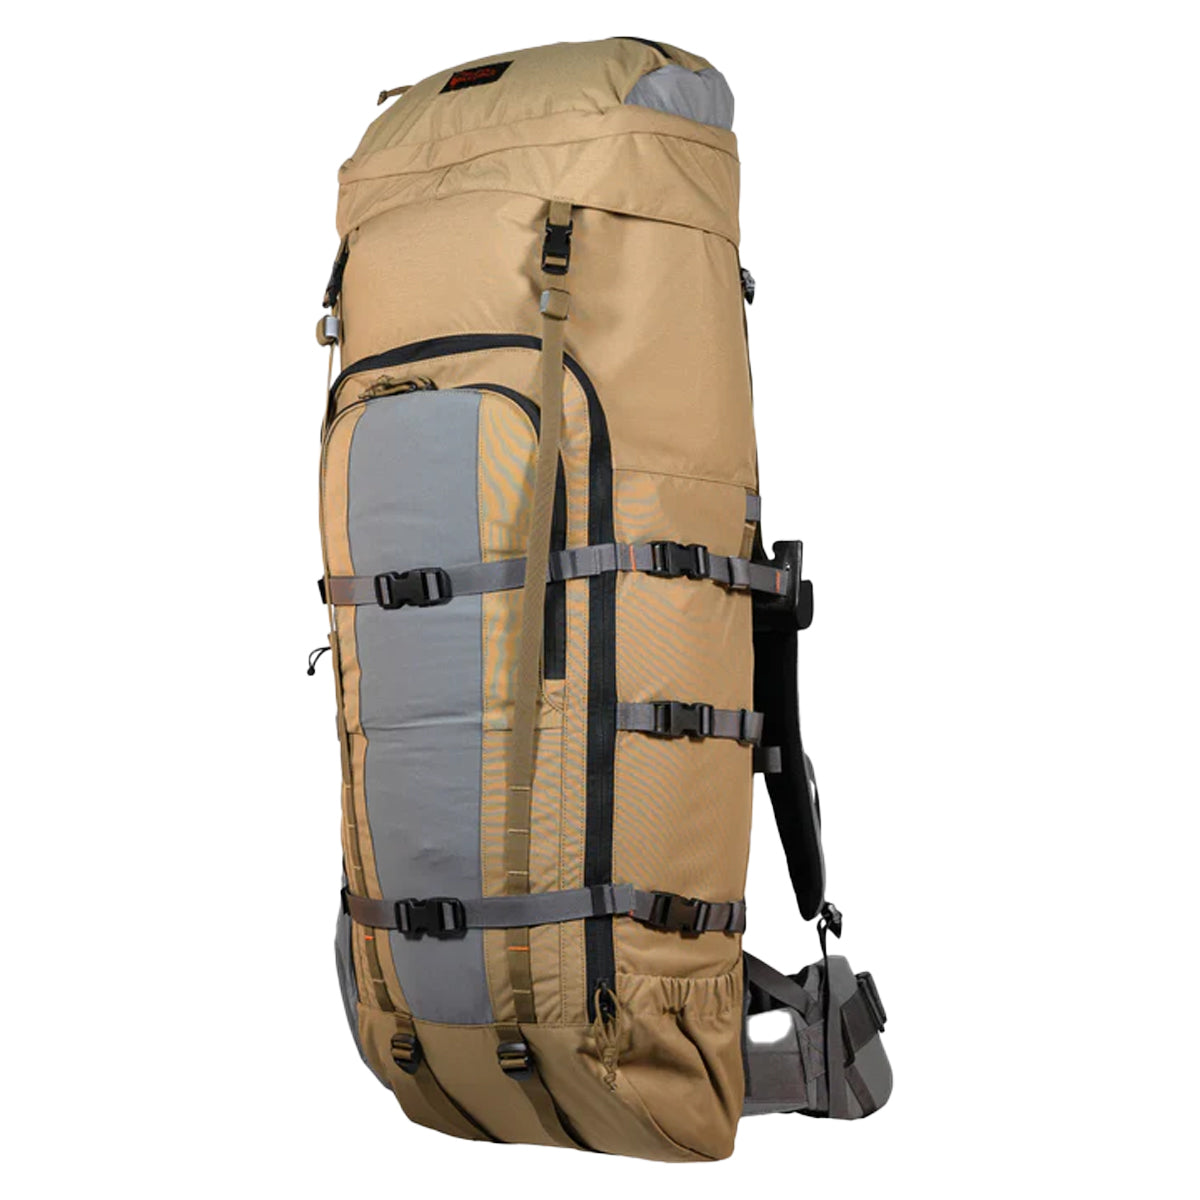 Initial Ascent 8K Backpack in  by GOHUNT | Initial Ascent - GOHUNT Shop